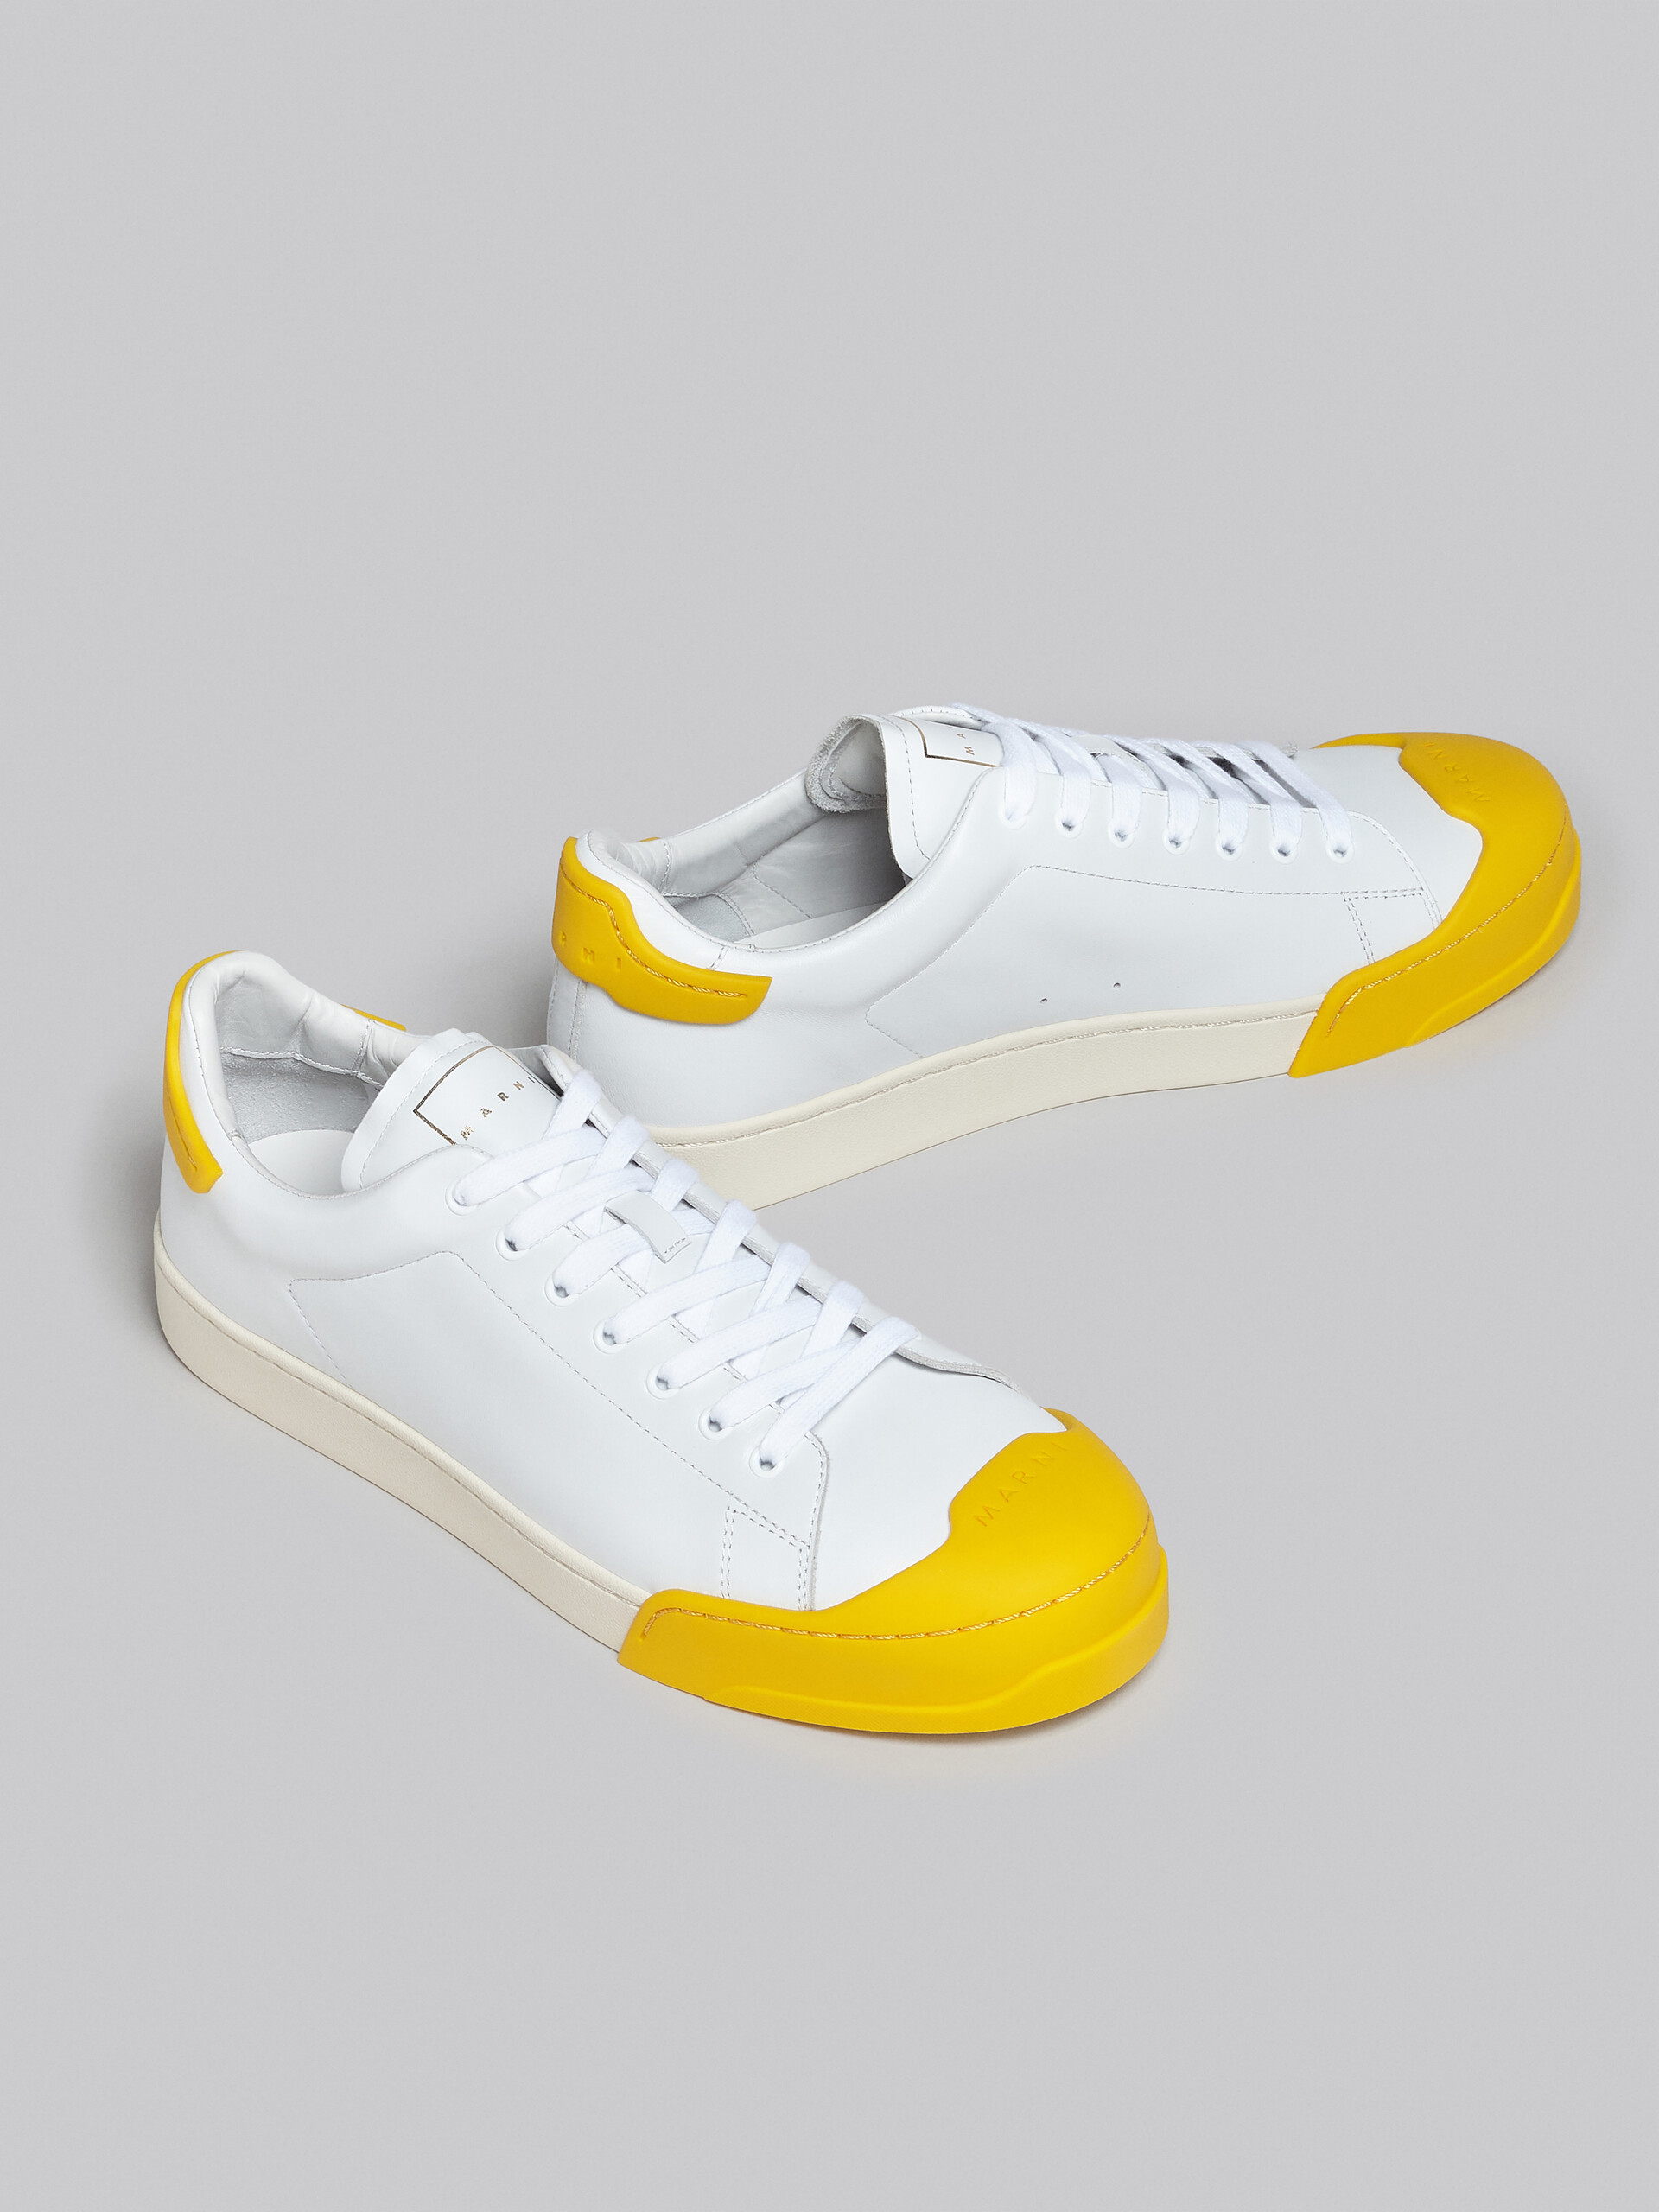 Dada Bumper sneaker in white and yellow leather - Sneakers - Image 5